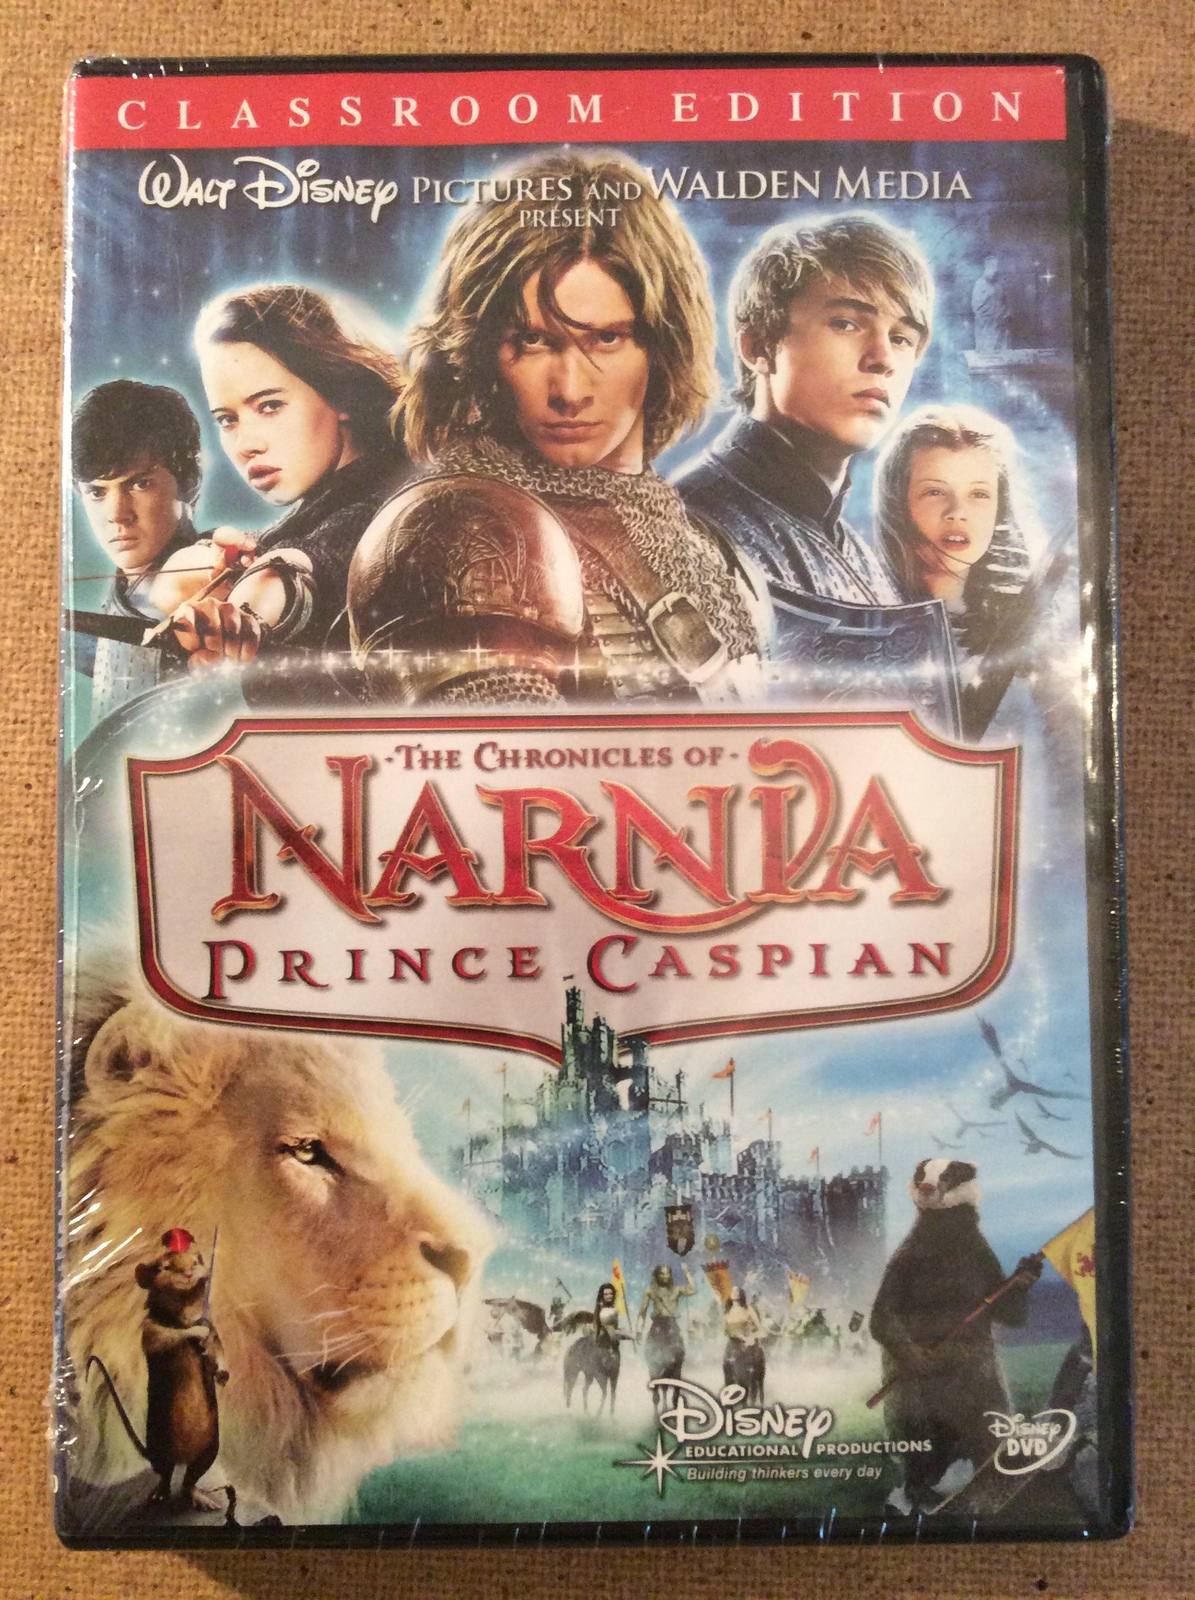 The Chronicles of Narnia - Prince Caspian - Classroom Edition DVD ...